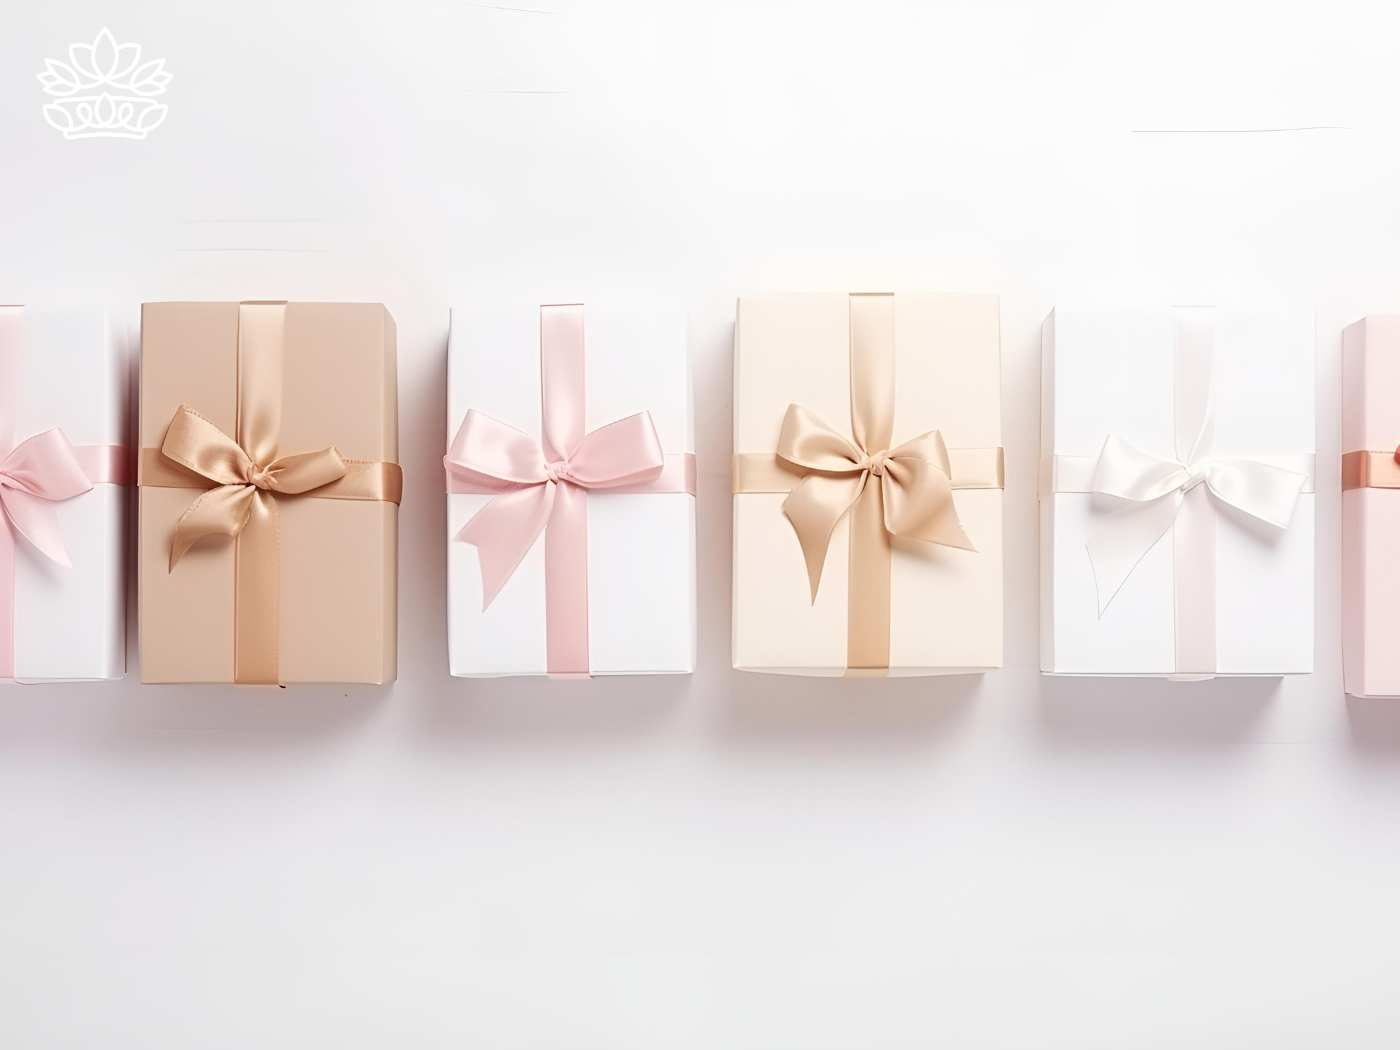 A neat arrangement of gender-neutral gift boxes in classic white and beige, tied with satin ribbons, perfect for holidays, practical for kids, and a thoughtful choice for a friend, featuring the Gender Neutral Gift Boxes Collection at Fabulous Flowers and Gifts.